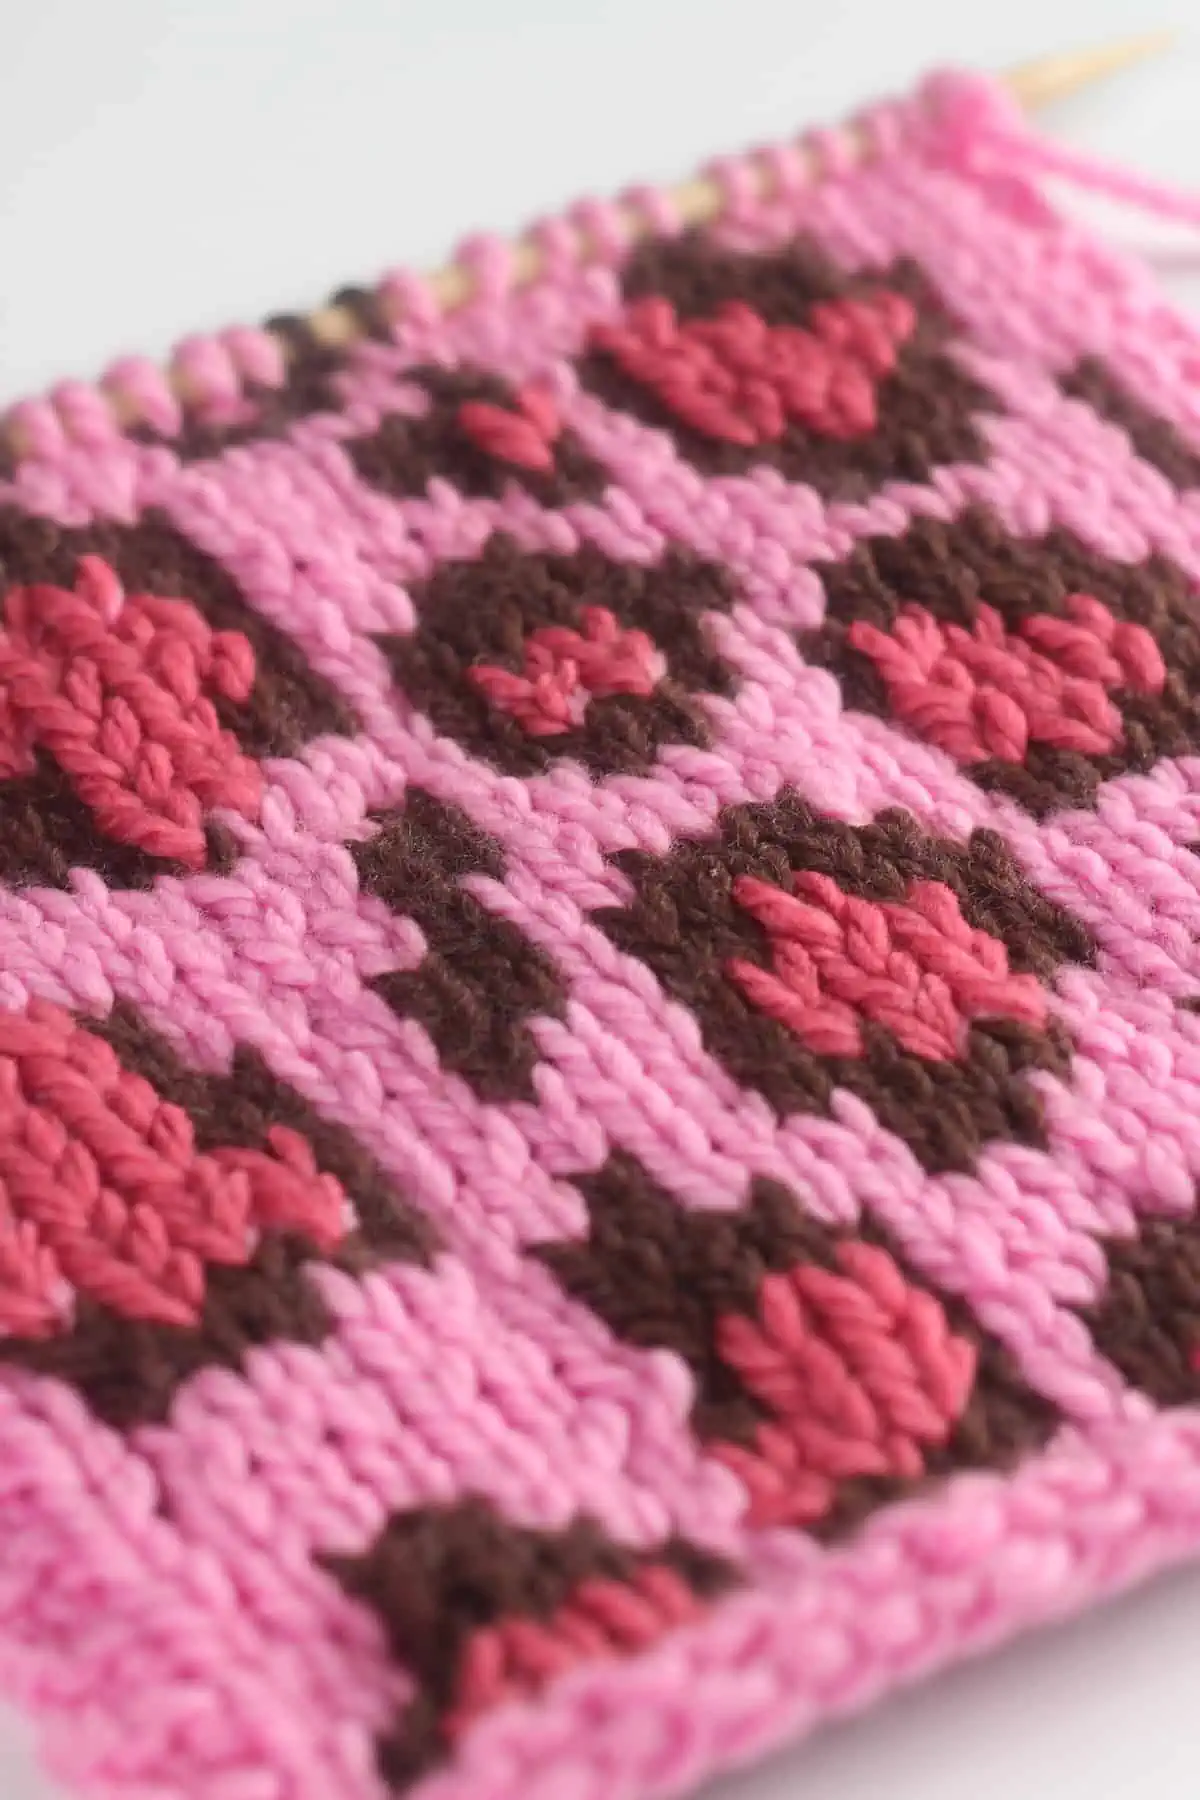 Close-up swatch of the Leopard Print knit stitch pattern in shades of pink and brown colored yarn on a knitting needle.